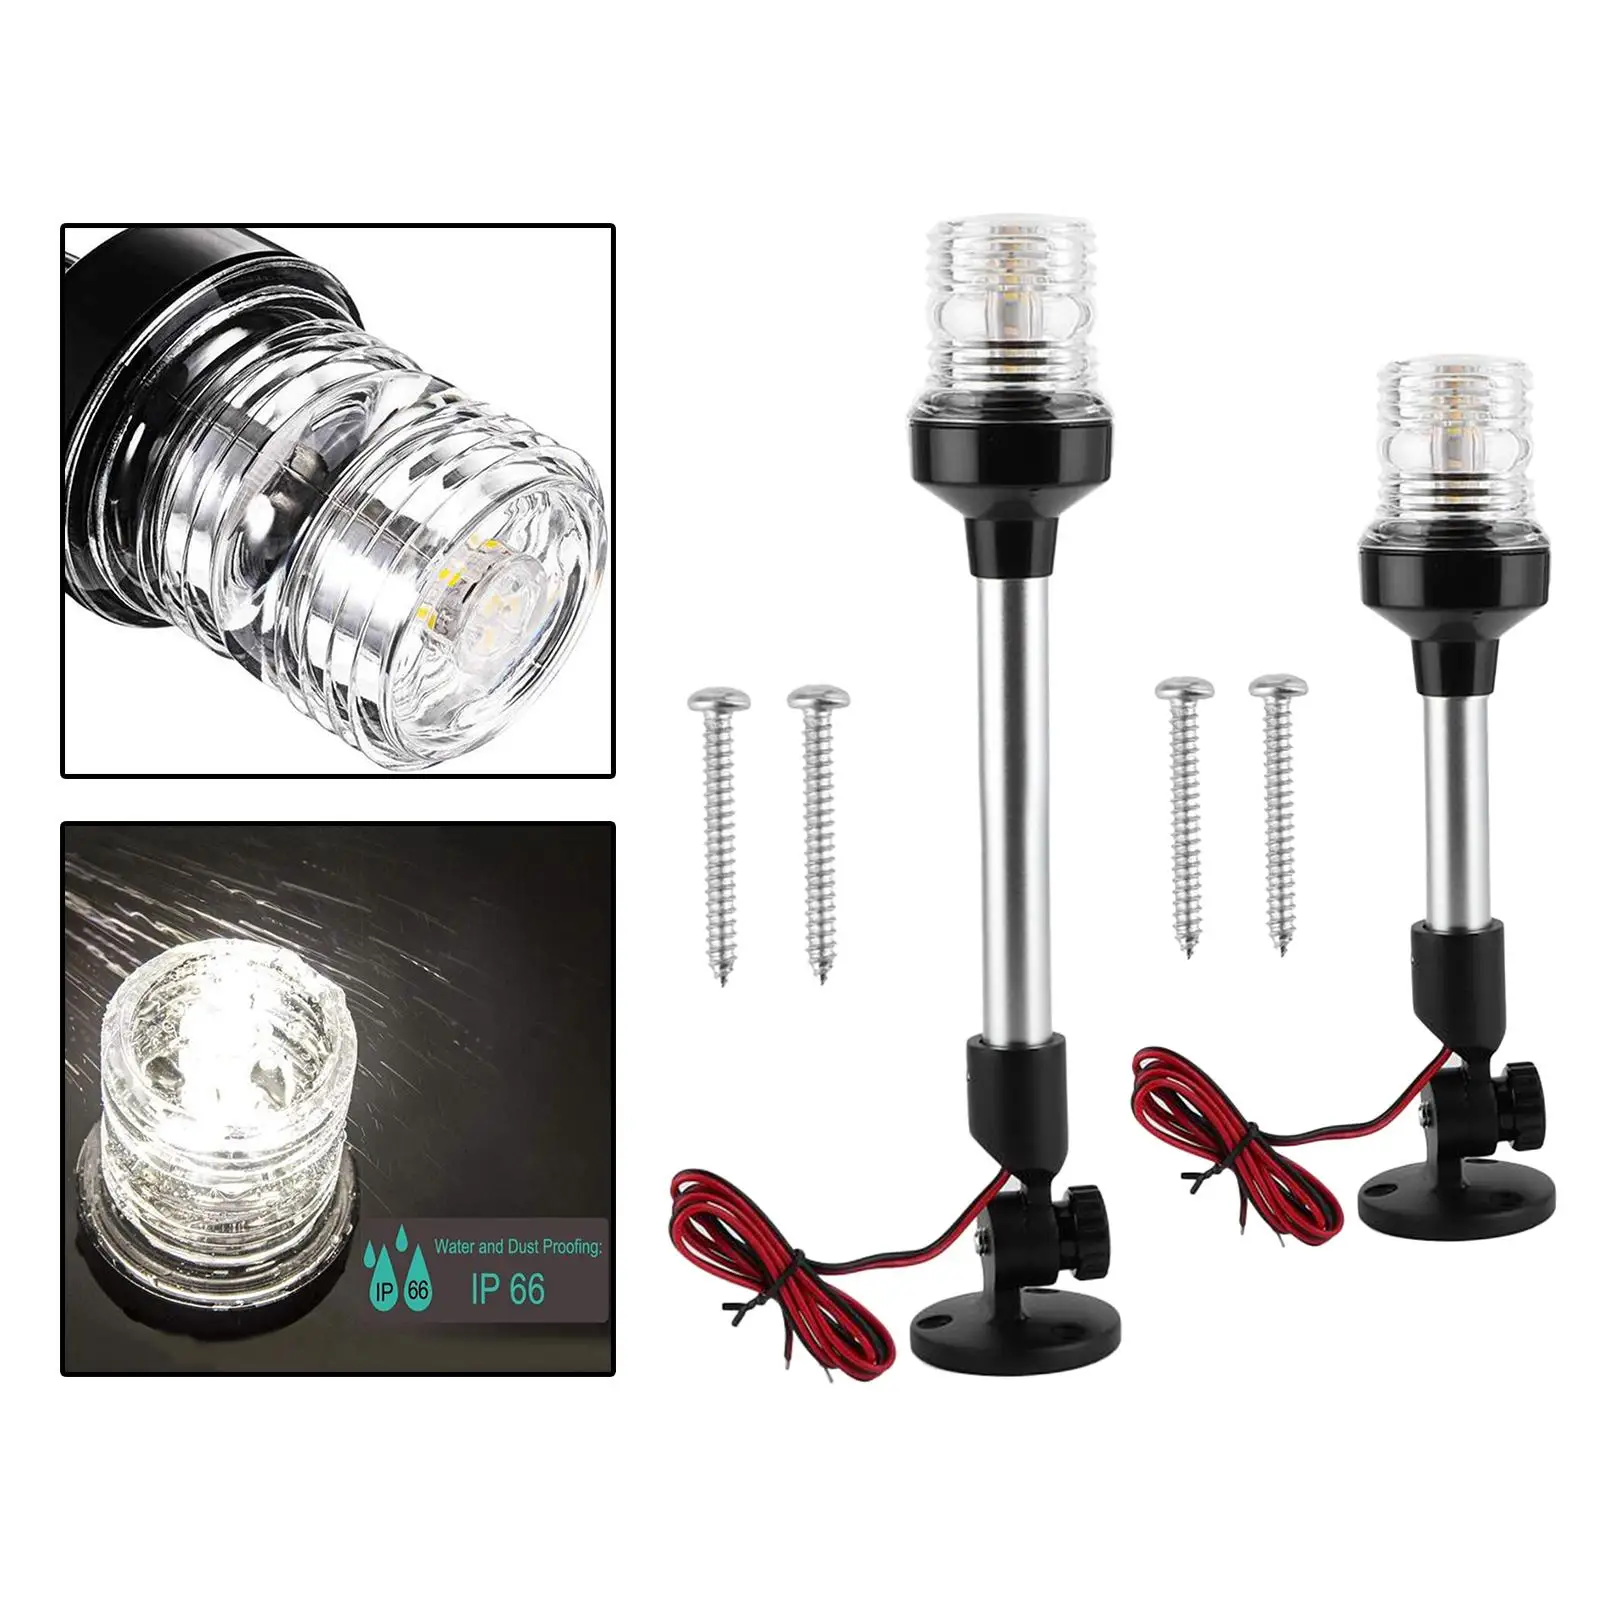 

WaterDurable Yacht Anchor lighting led Marine Boat Safety Stern 360° Navigation Lamps Pontoon Safety 12- Lights